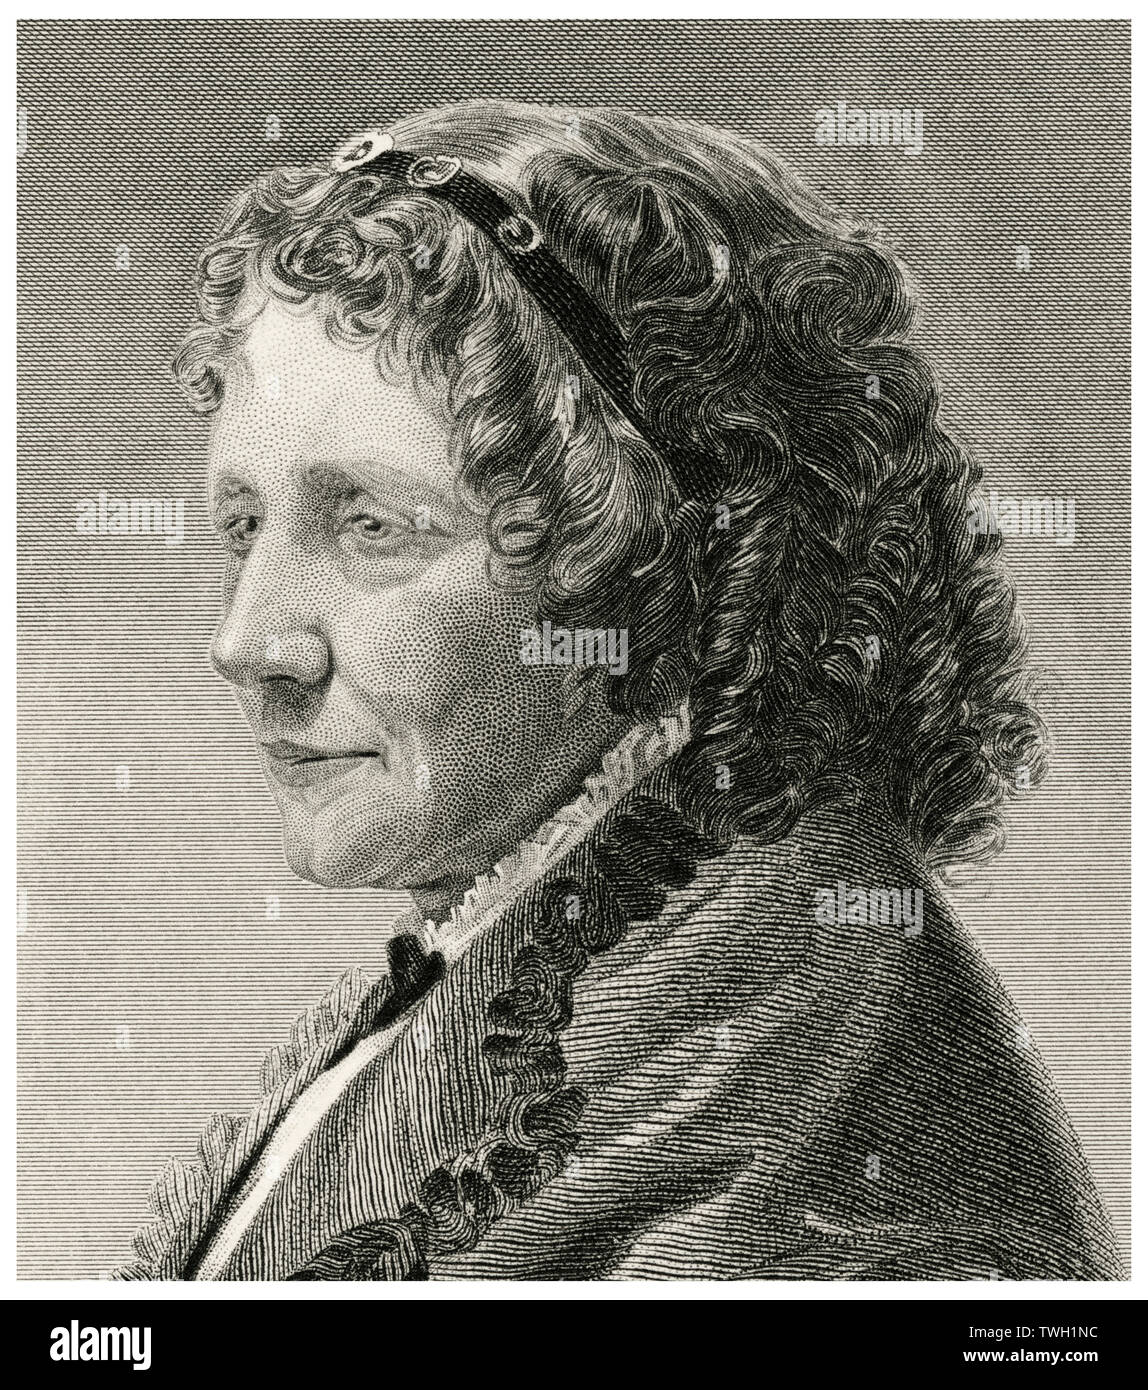 Harriet Beecher Stowe (1811-96), American Writer and Abolitionist, Head and Shoulders Portrait, Steel Engraving, Portrait Gallery of Eminent Men and Women of Europe and America by Evert A. Duyckinck, Published by Henry J. Johnson, Johnson, Wilson & Company, New York, 1873 Stock Photo